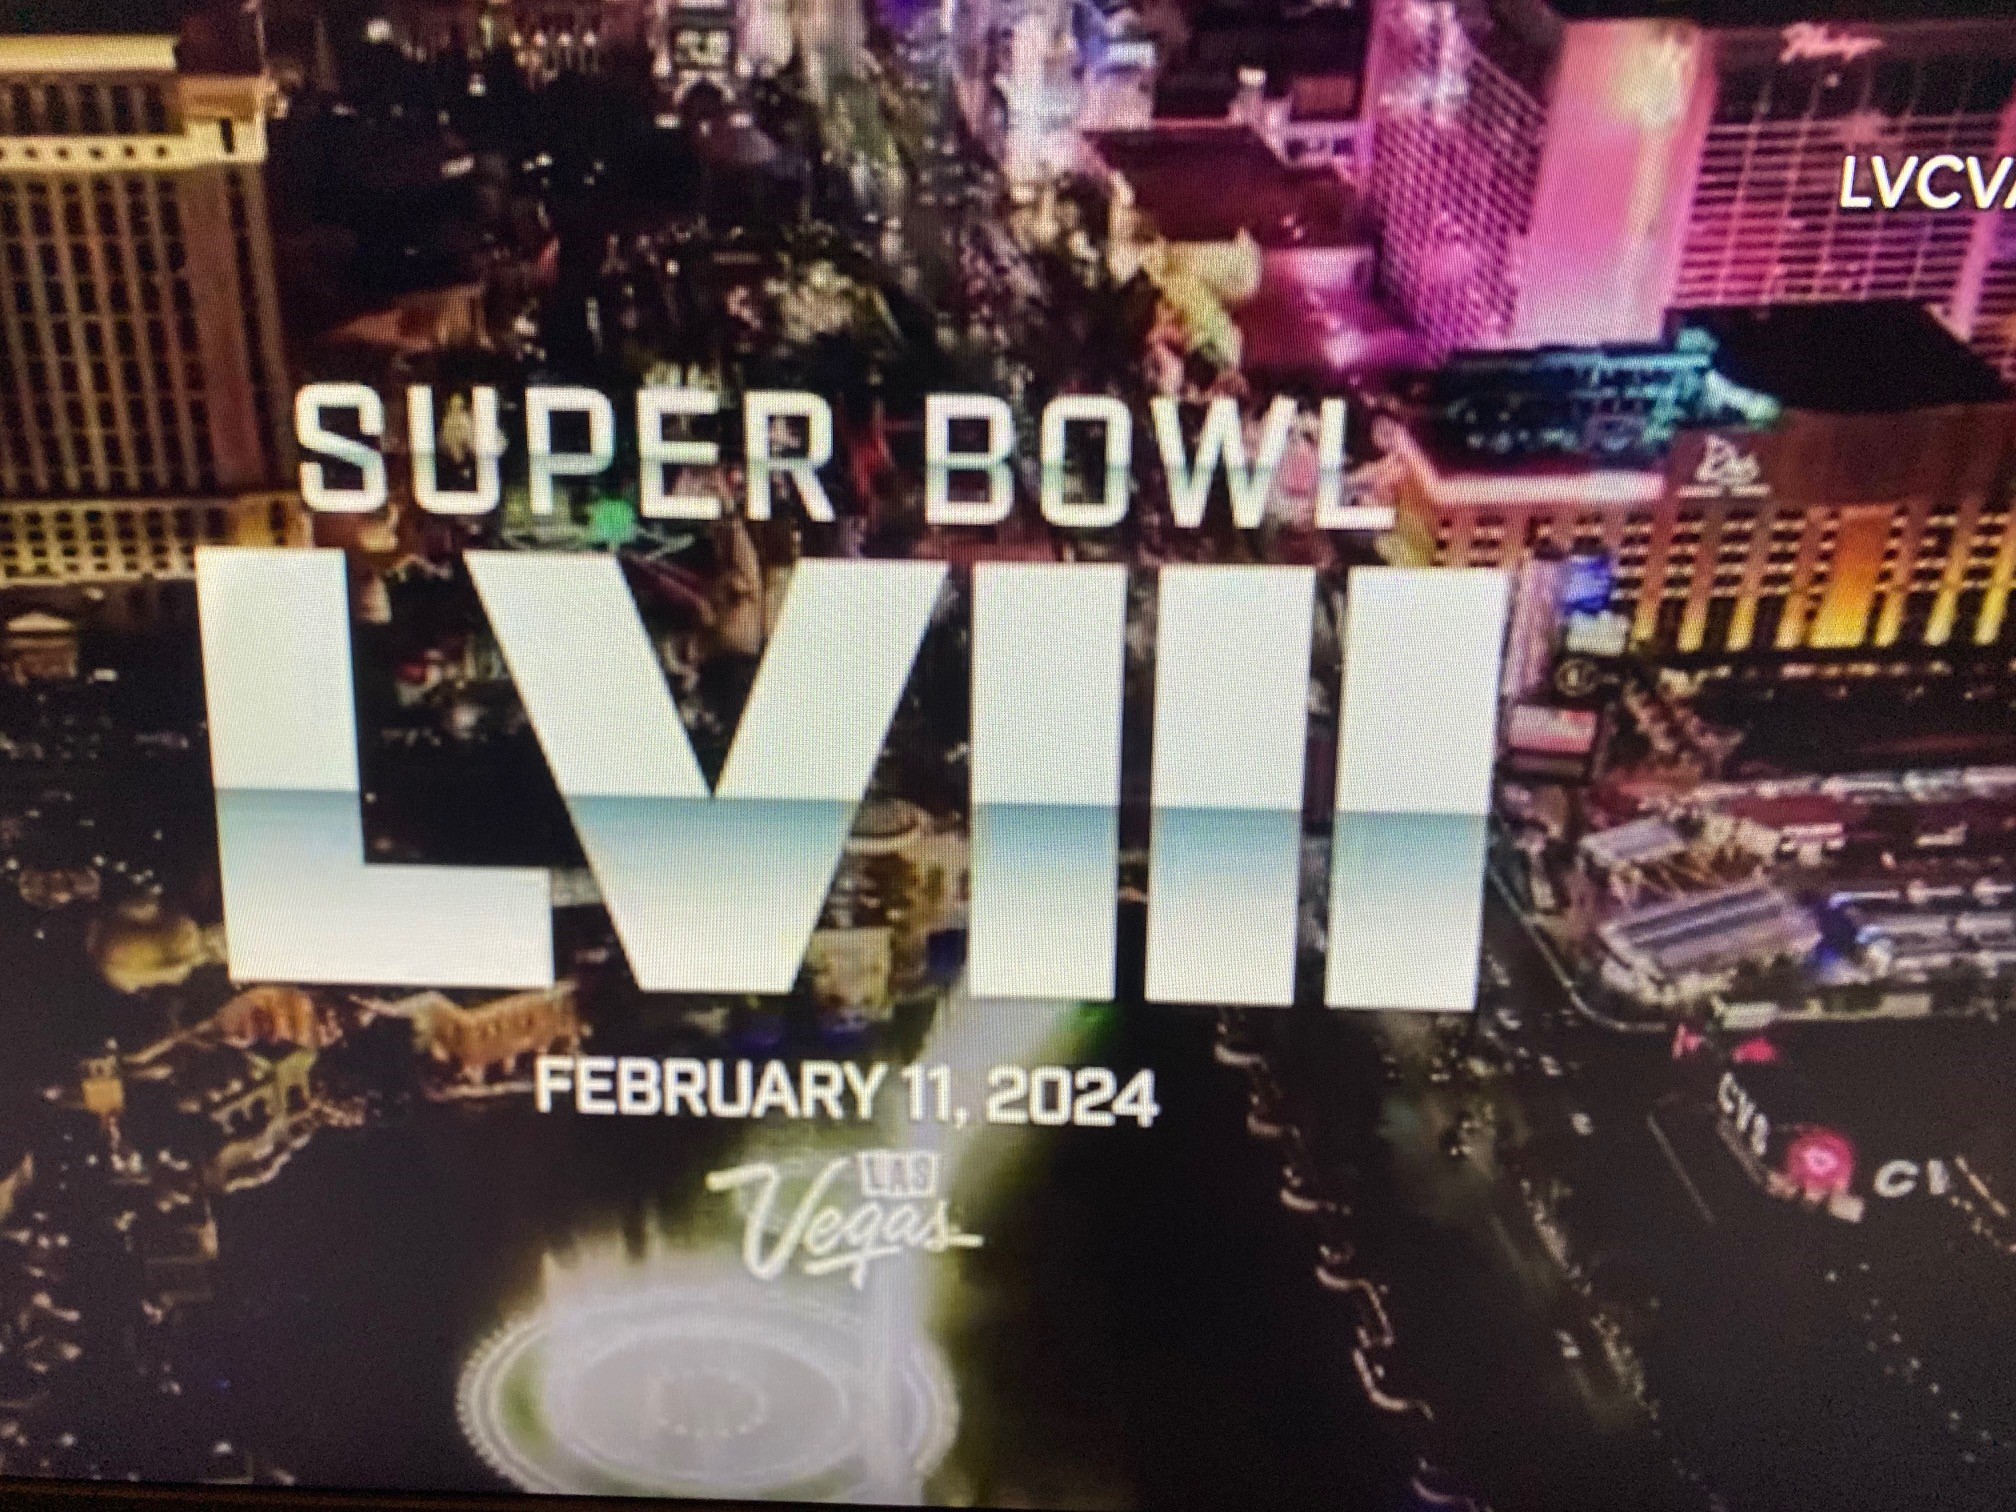 2024 Las Vegas Super Bowl tickets: Here's what we know